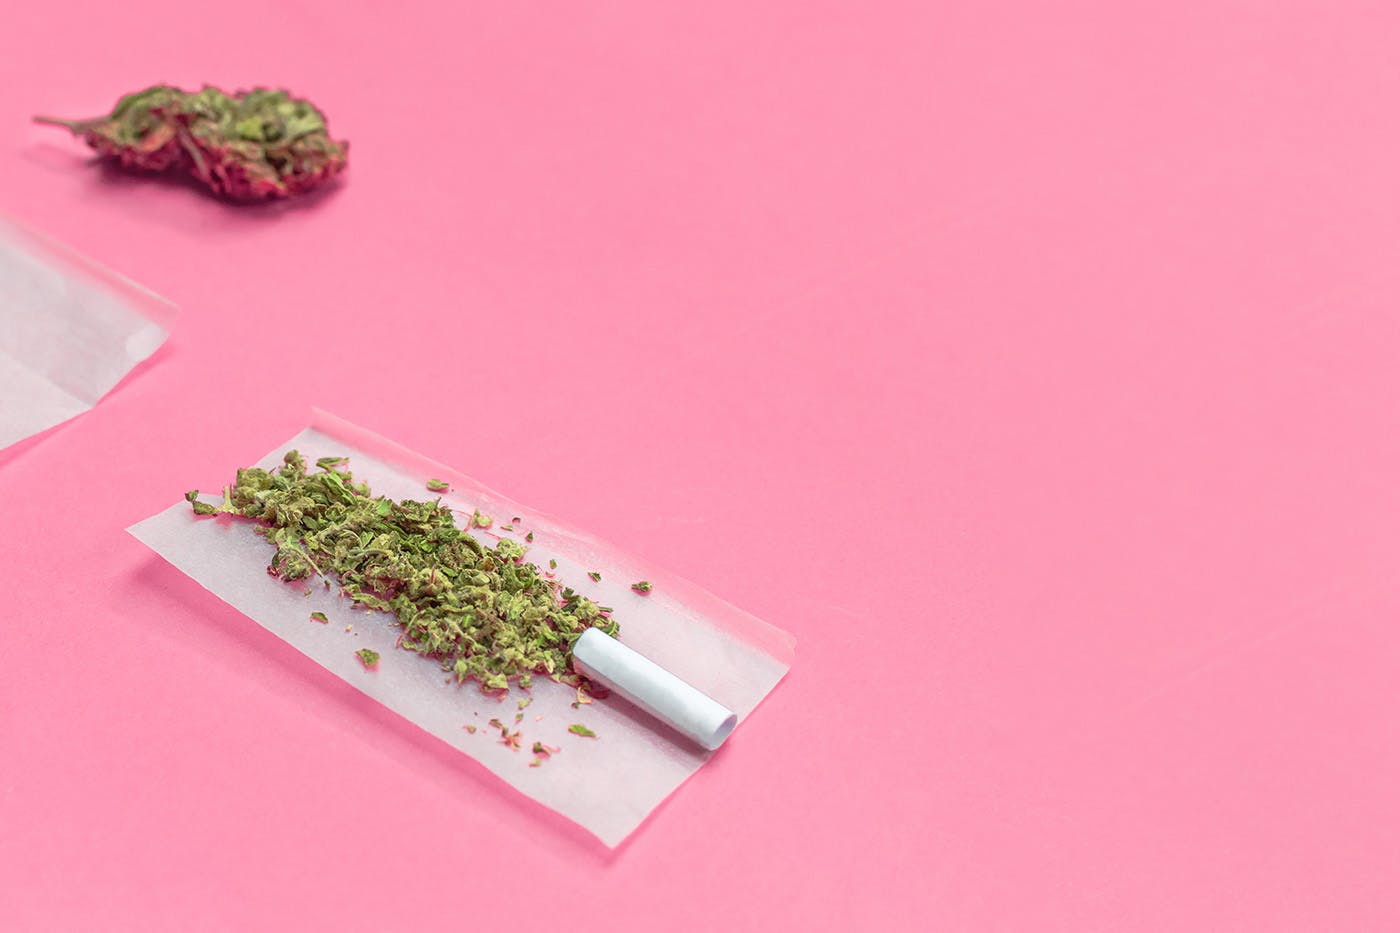 Joint on pink background with weed